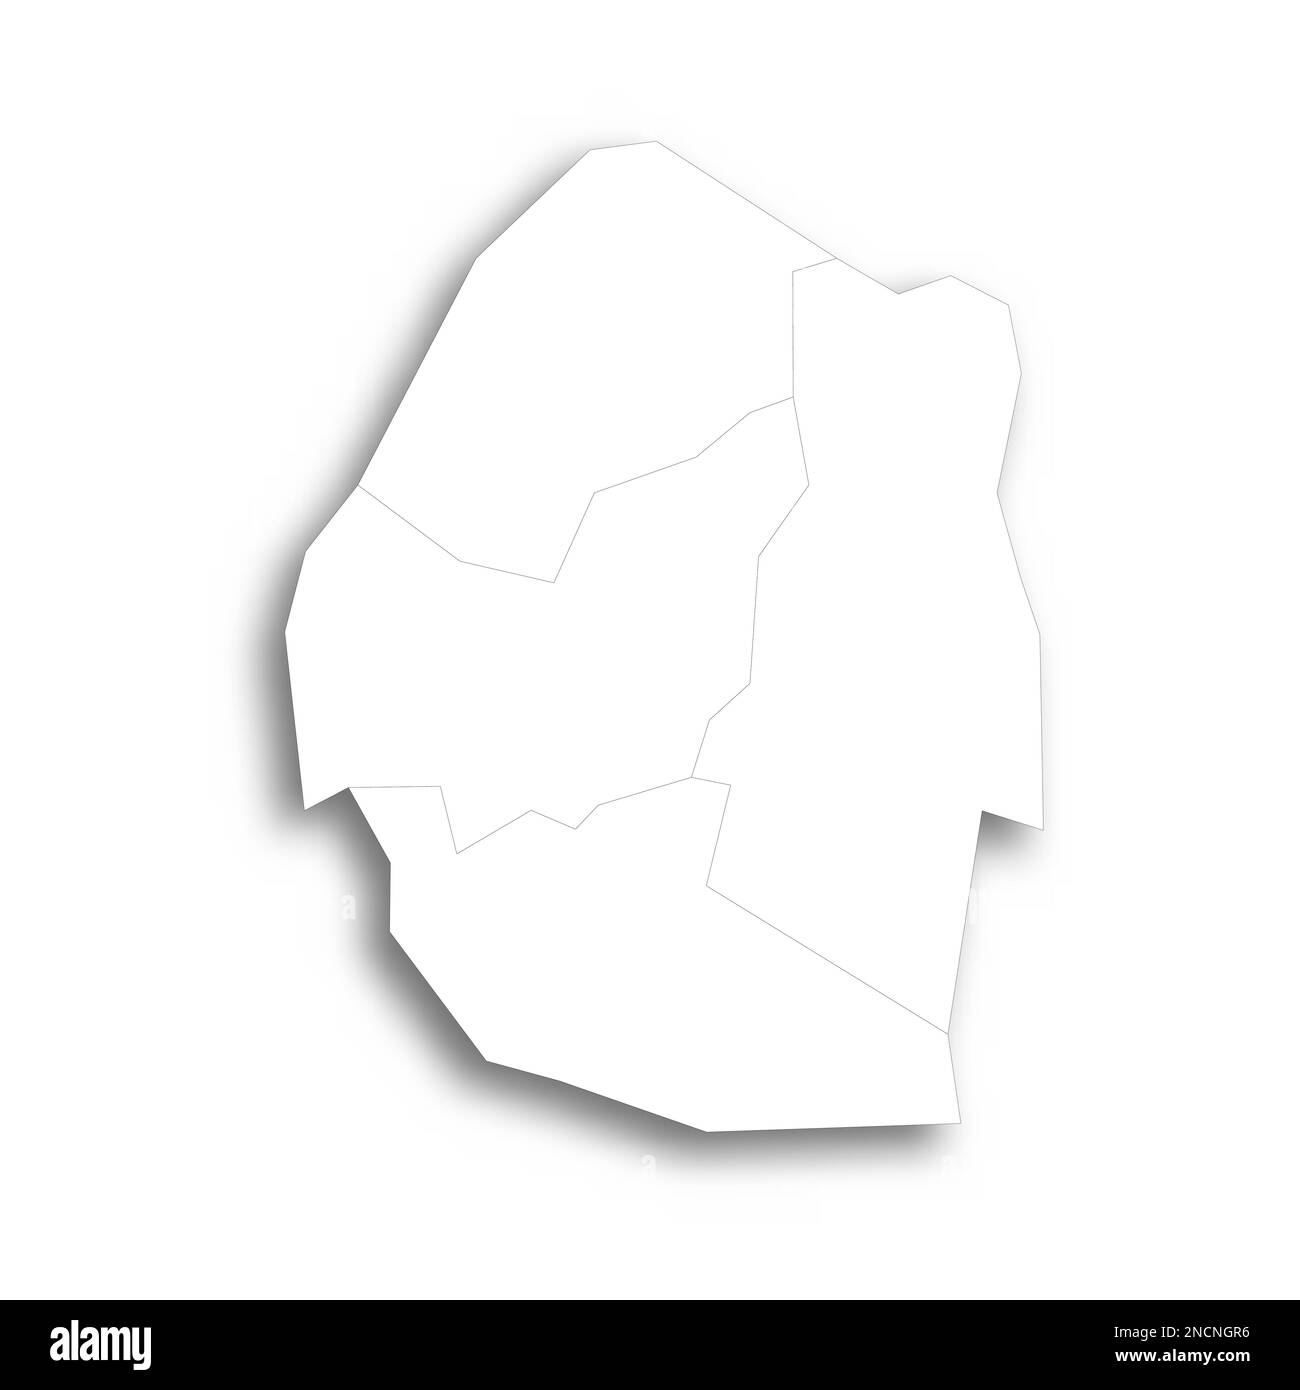 Eswatini political map of administrative divisions - regions. Flat white blank map with thin black outline and dropped shadow. Stock Vector